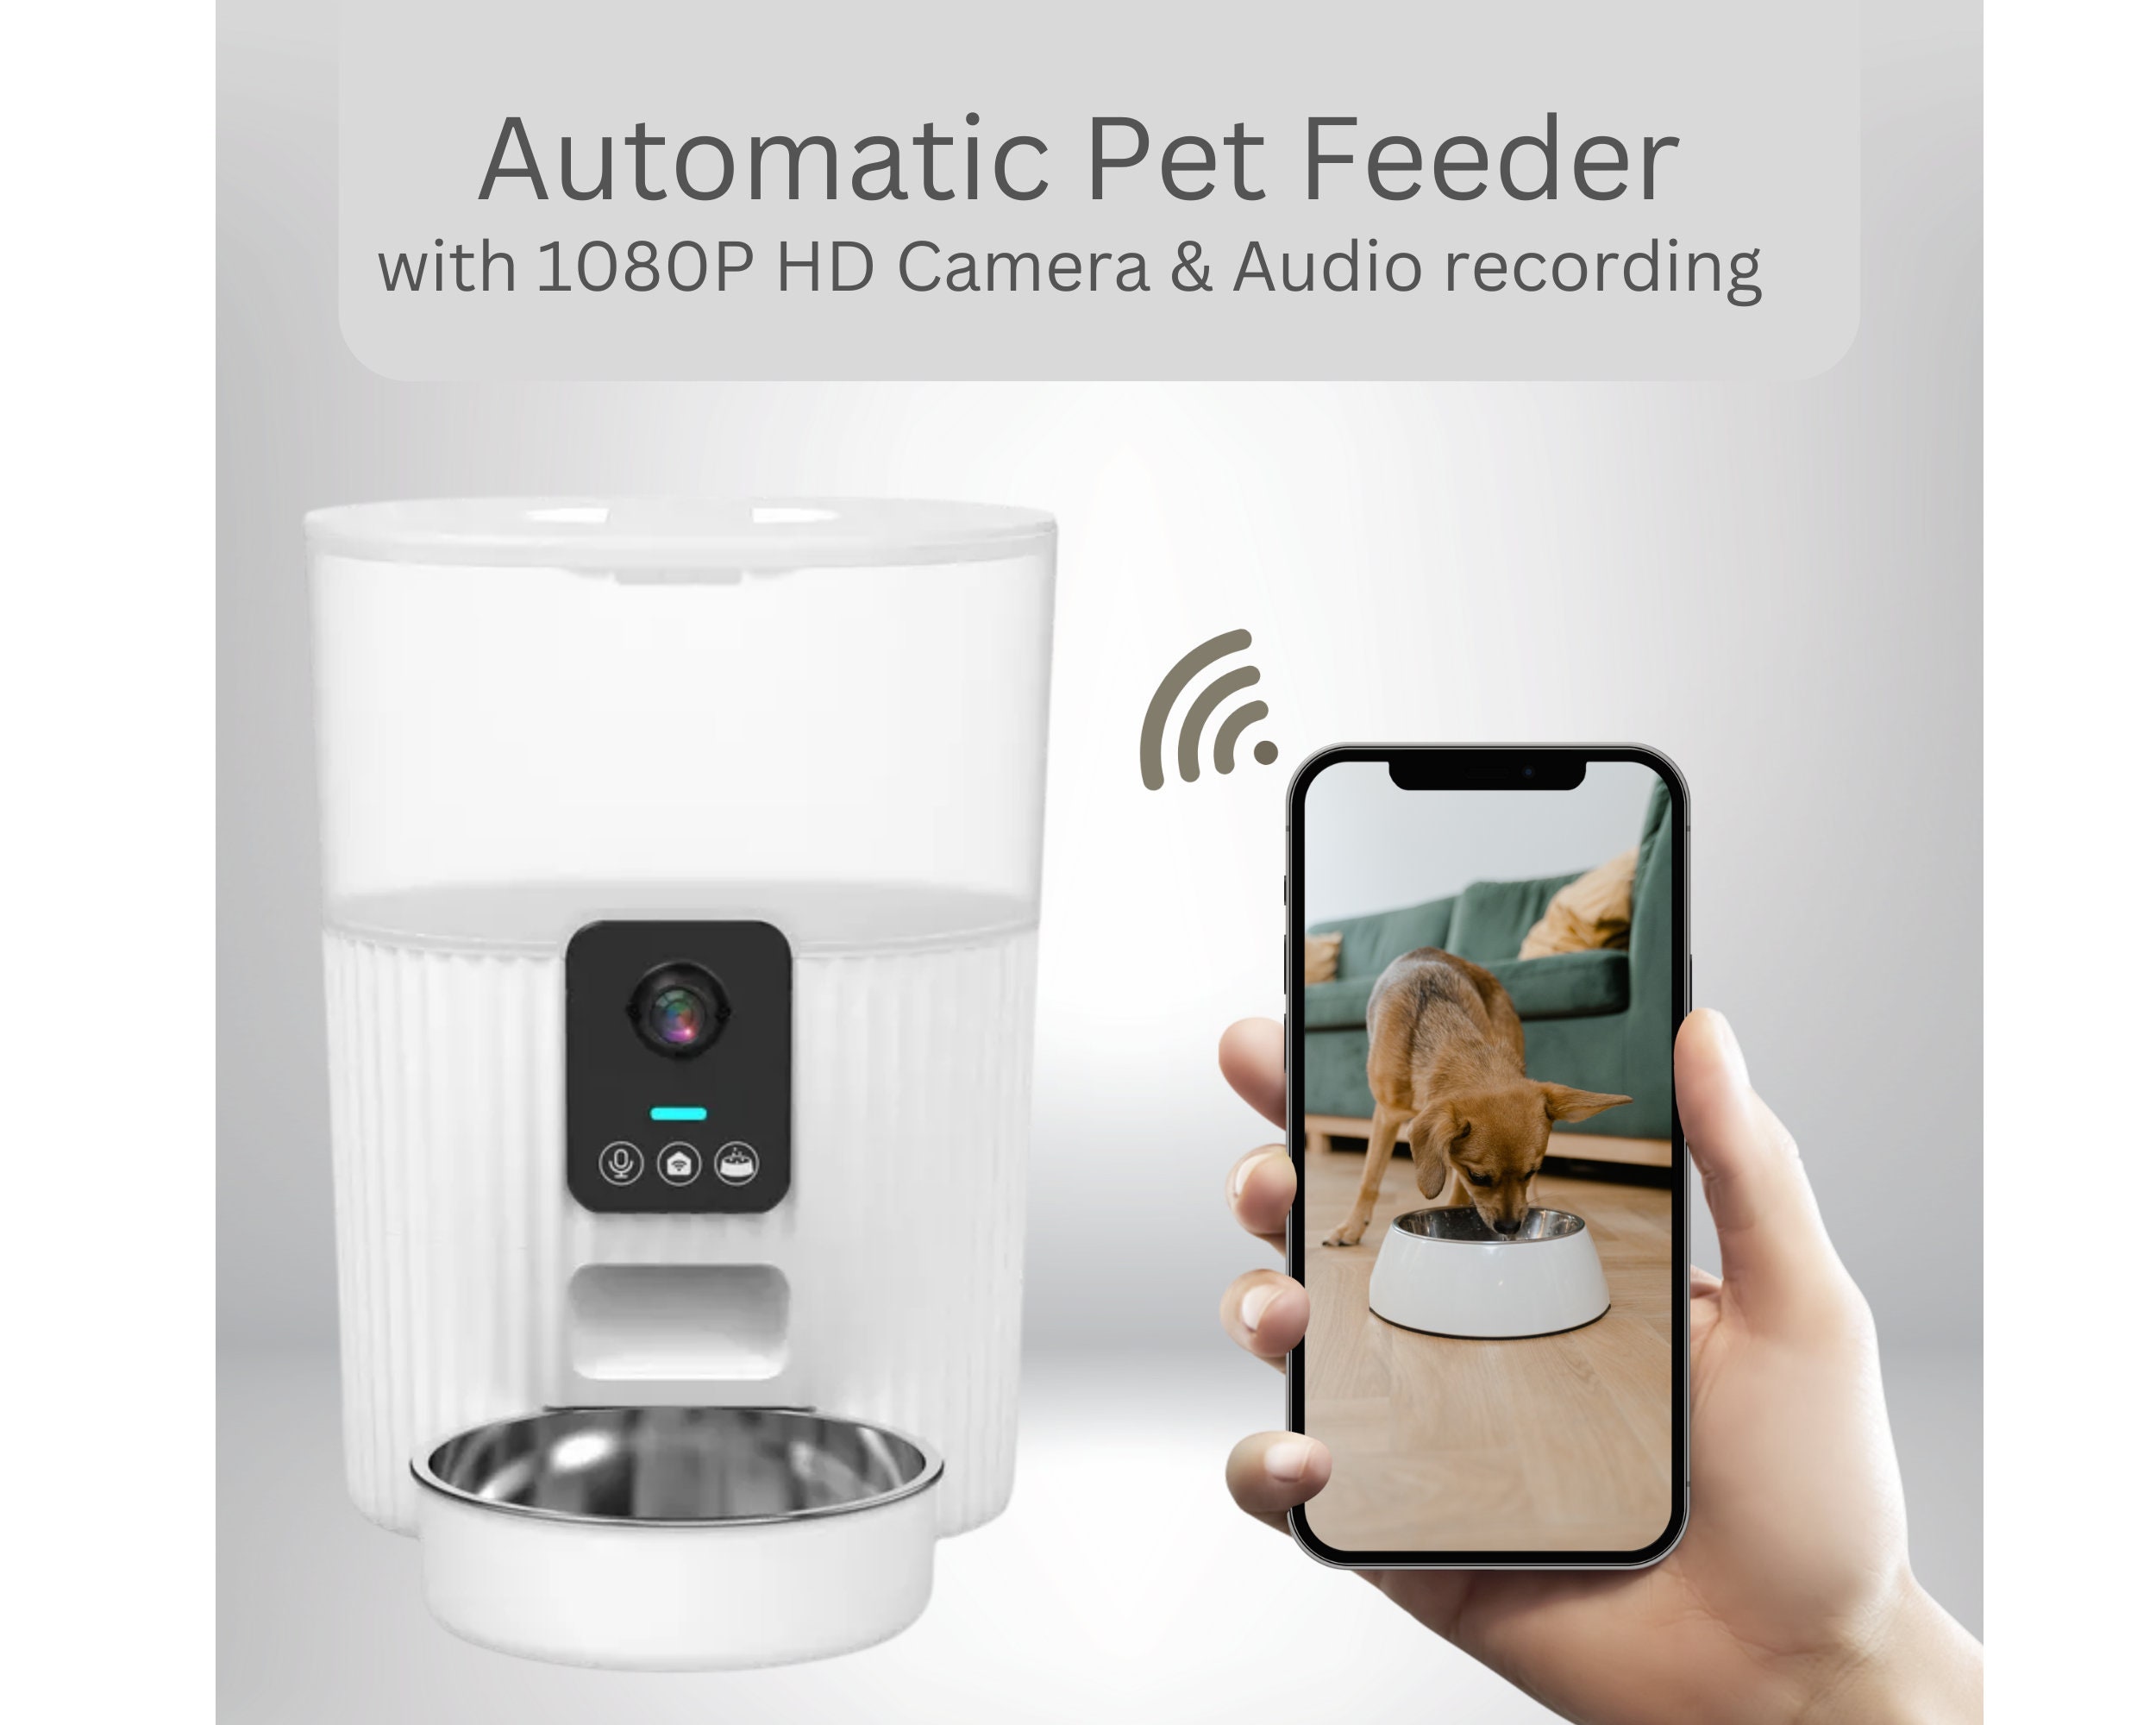 Smart Pet Feeder, Automatic Pet Feeder - with 1080P HD Camera